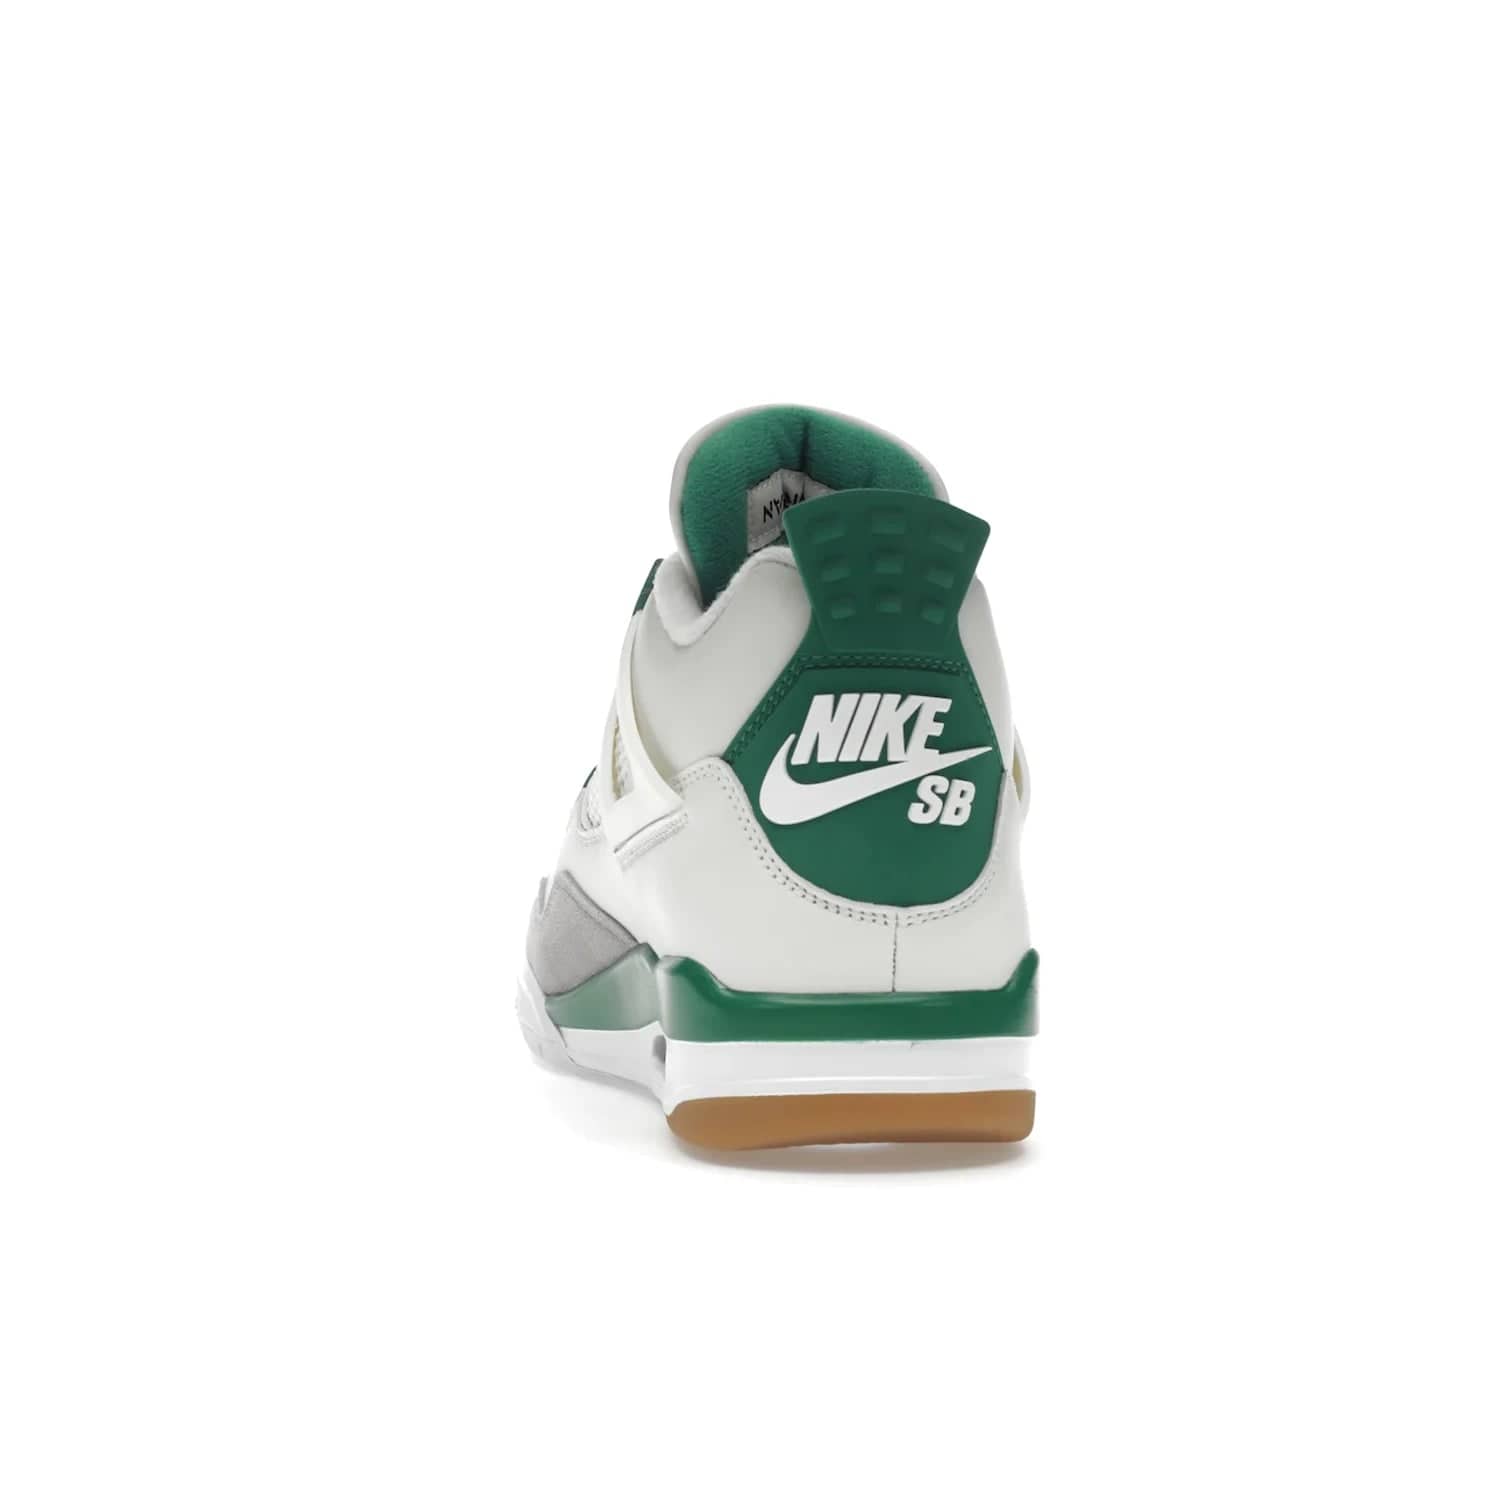 Jordan 4 Retro SB Pine Green - Image 27 - Only at www.BallersClubKickz.com - A white leather upper combined with a Neutral Grey suede mudguard gives this limited Air Jordan 4 Retro SB Pine Green sneaker its unmistakable style. Released March 20, 2023, the Jordan 4 Retro SB features a white and Pine Green midsole plus a red air unit with a gum outsole for grip. The perfect blend of Nike SB skateboarding and Jordan 4 classic design.